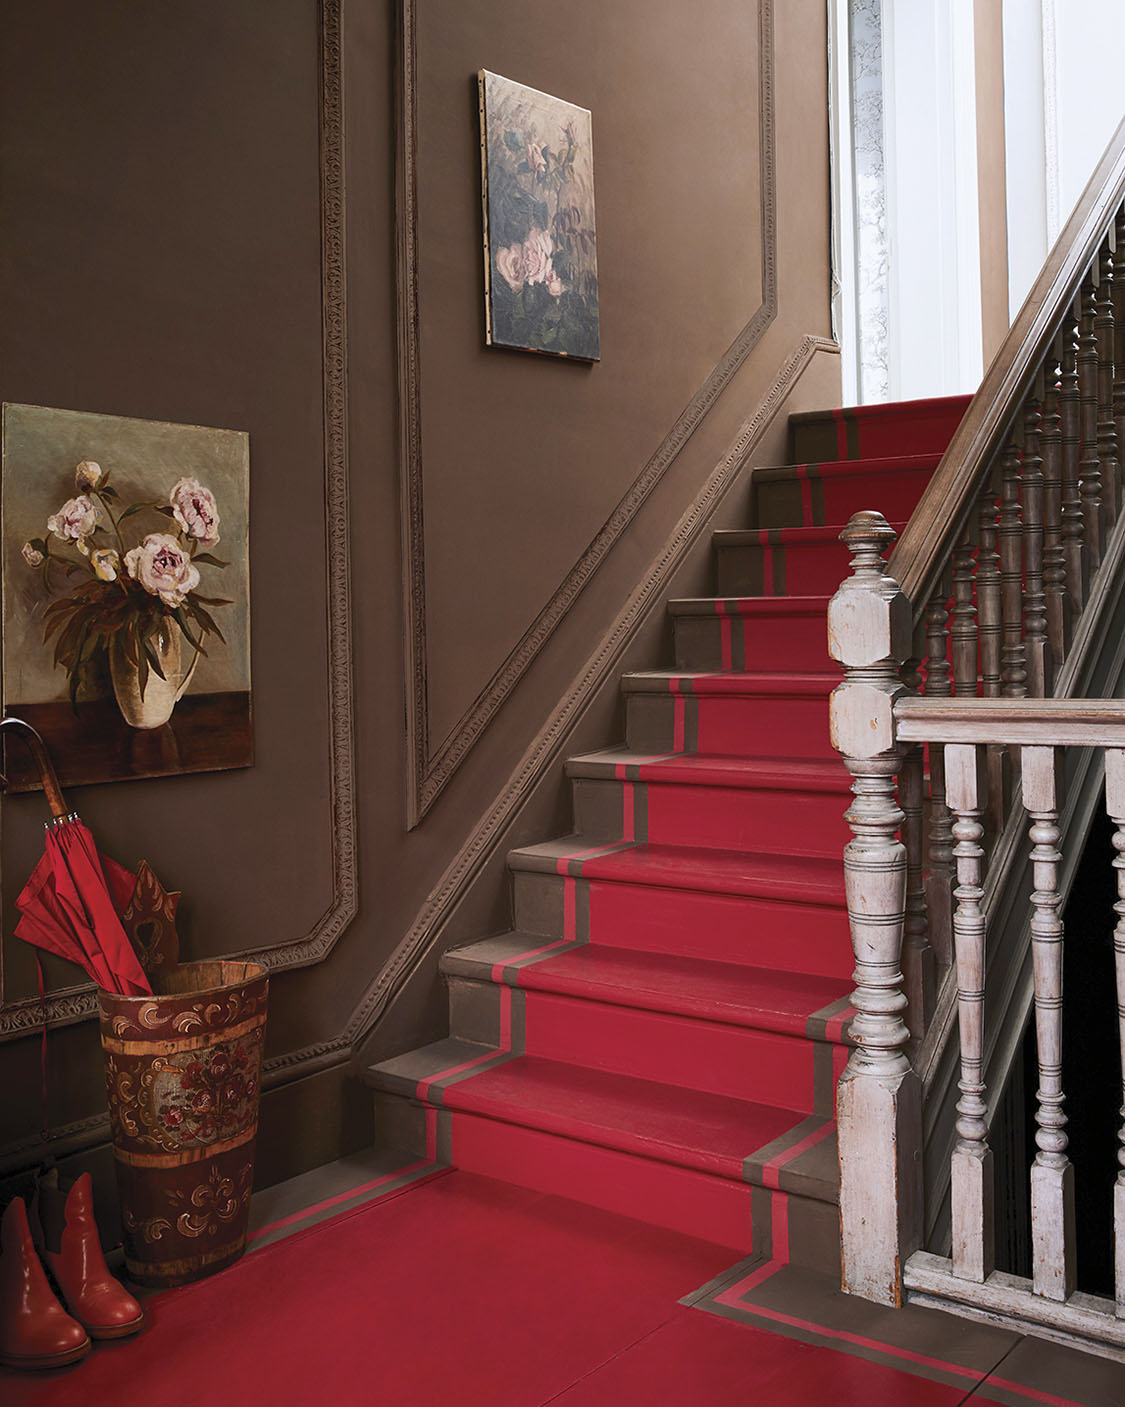 A stair case with walls and stairs painted brown with a red painted runner on the stairs and landing